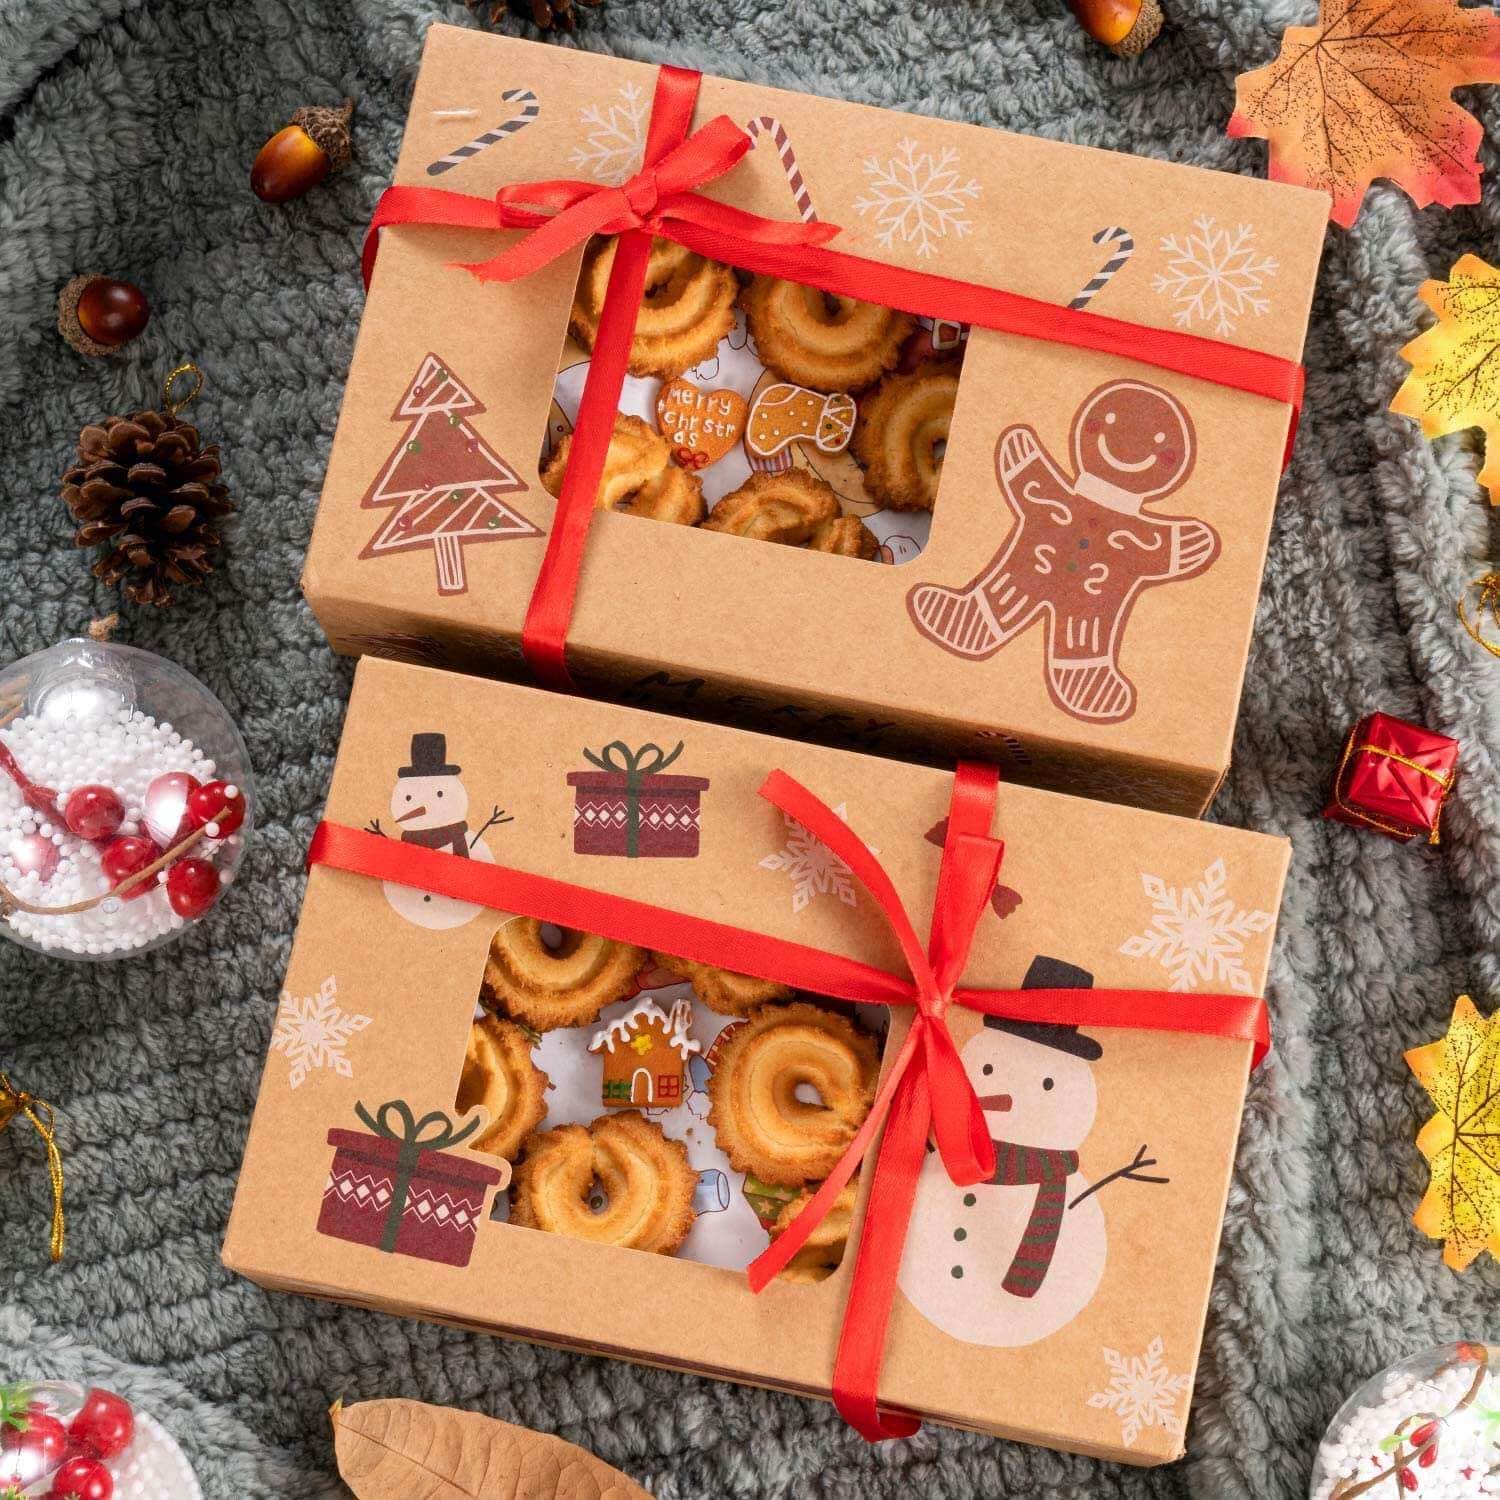 Sunolga Christmas Cookie Boxes 12 pcs Kraft With Window Christmas Treats Boxes For Gifting Bakery Candy Dessert Boxes With Christmas Stickers For Holiday Christmas Food Containers For Gift Giving